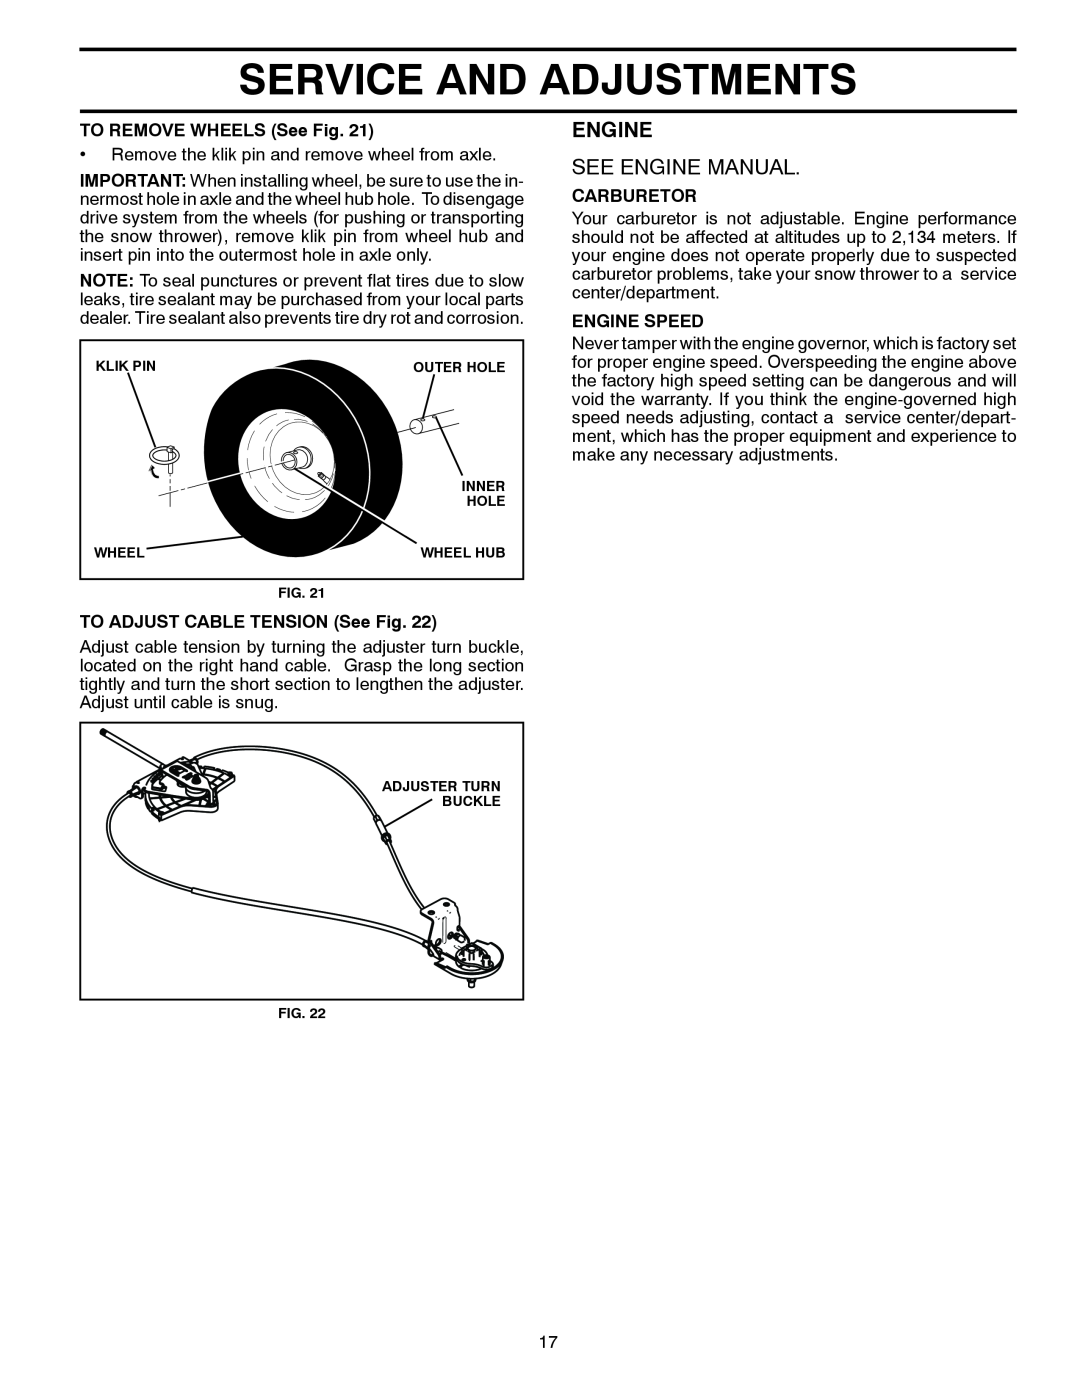 Husqvarna 1827SB Service And Adjustments, See Engine Manual, TO REMOVE WHEELS See Fig, TO ADJUST CABLE TENSION See Fig 